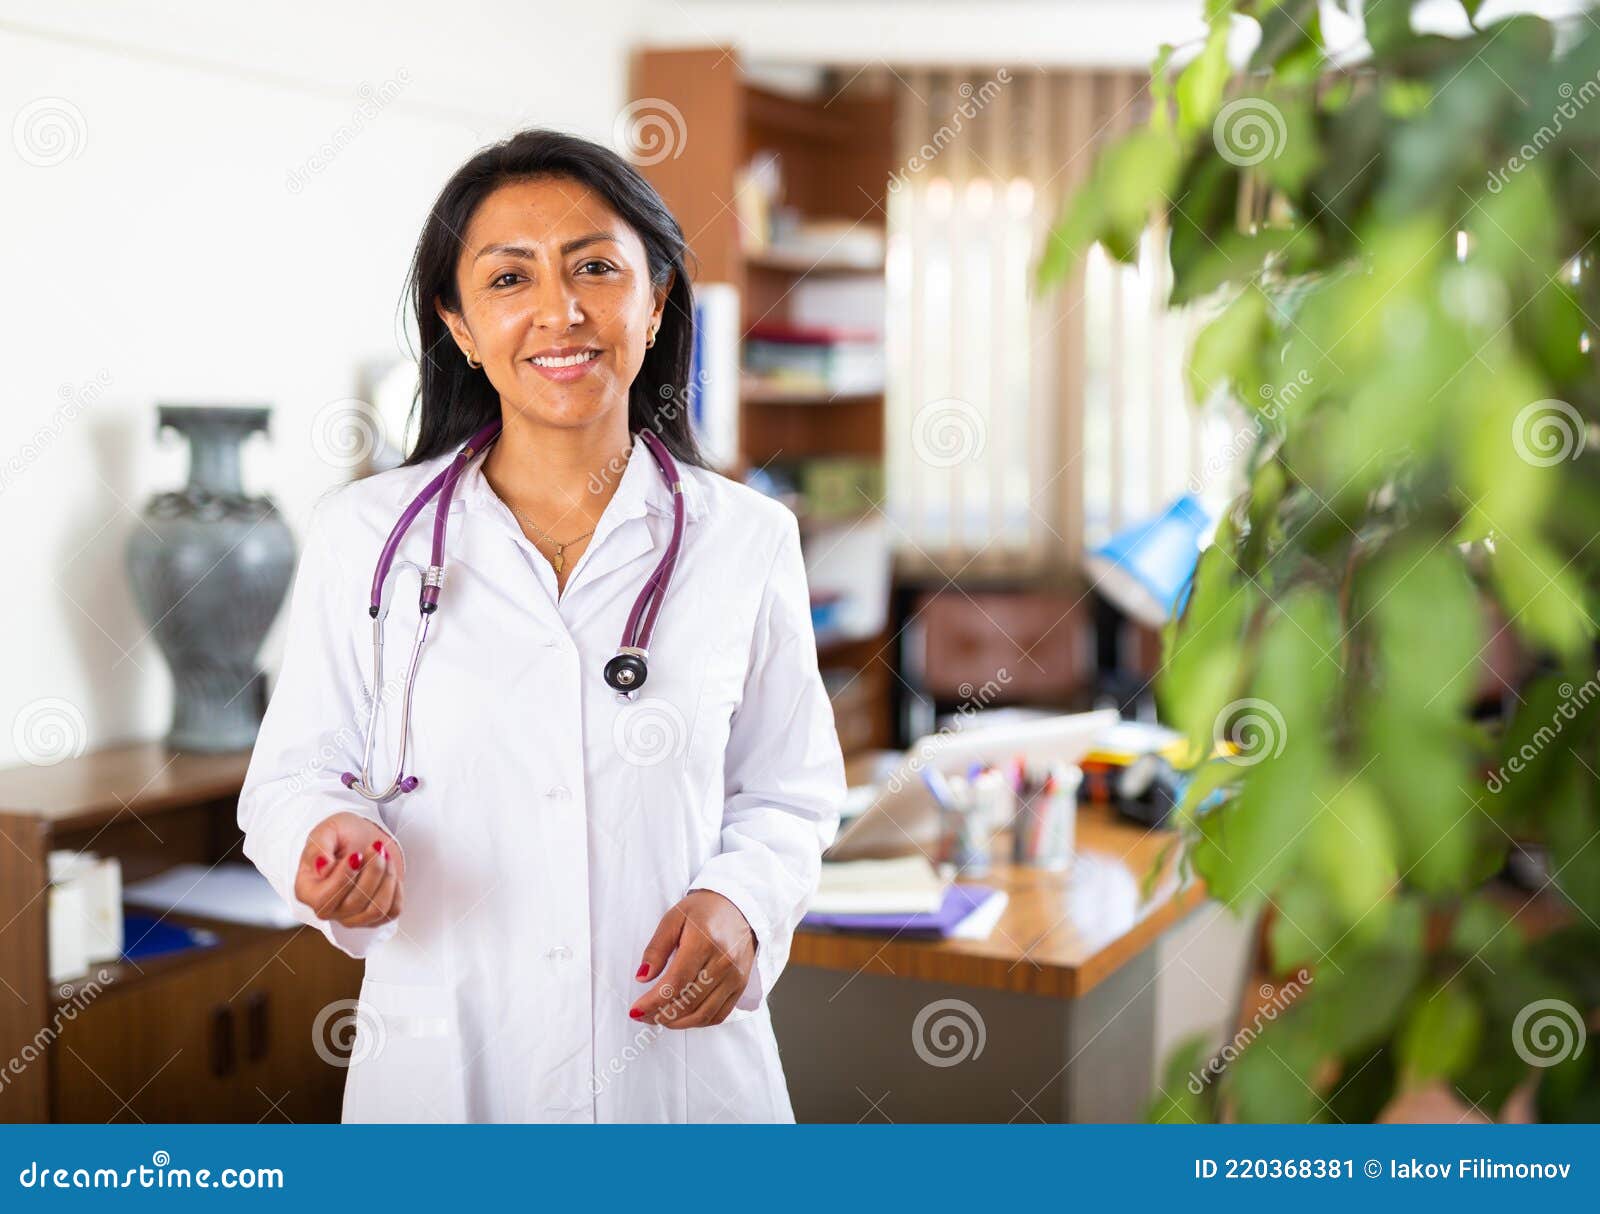 Woman Doctor Wear White Medical Uniform and Stethoscope Look at Camera ...